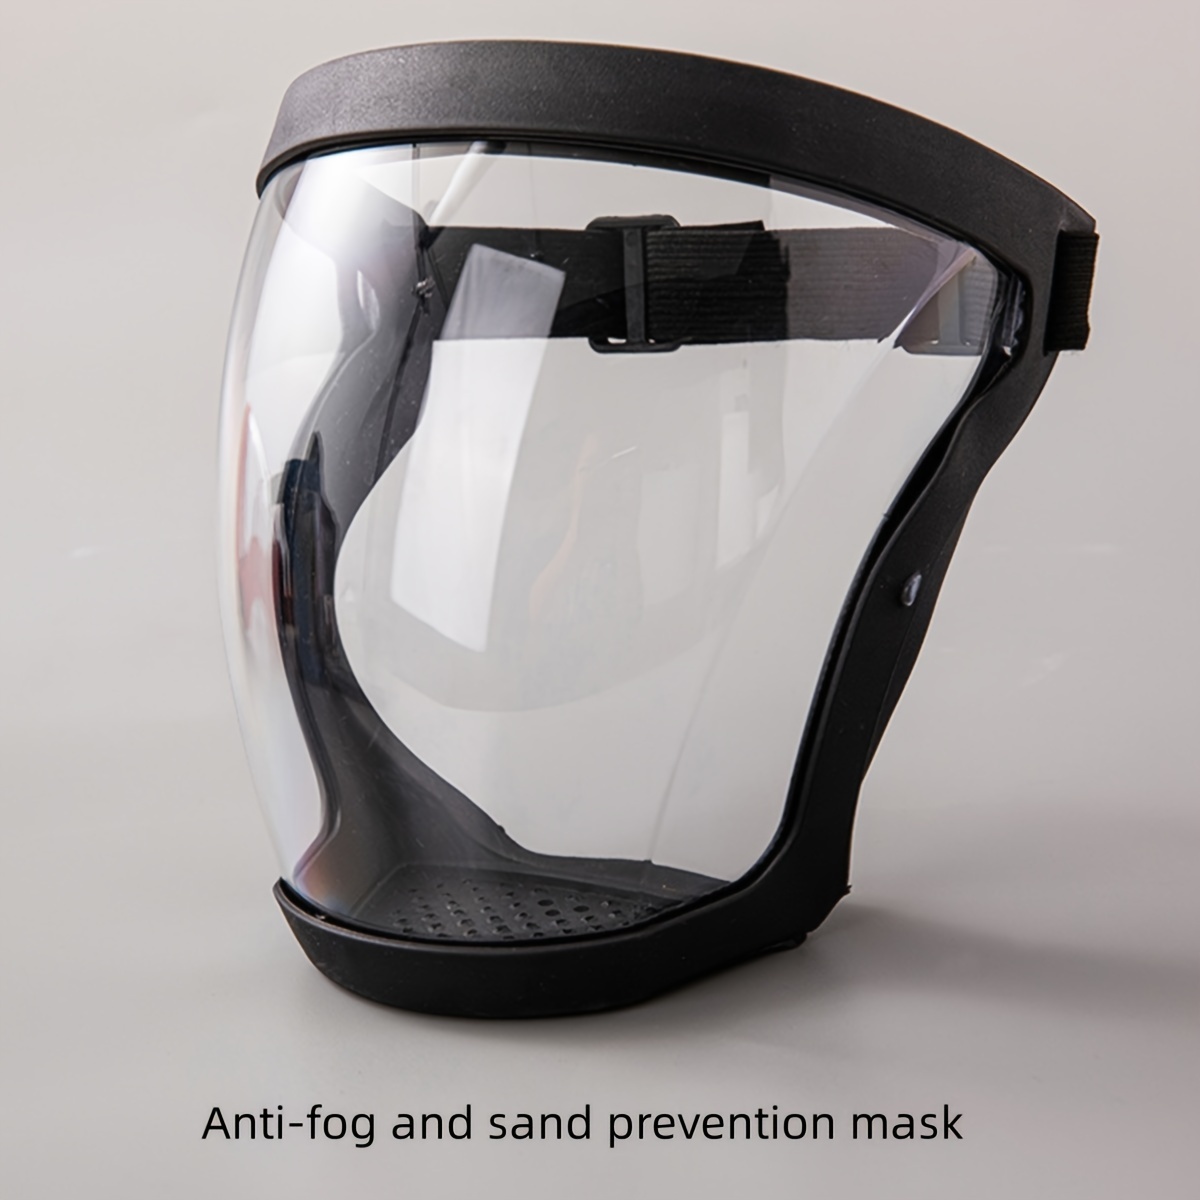 

1pc High-definition Anti-fog Horse Head Mask, Upgraded Full Face Protective Riding Mask, Impact-resistant Windproof Mask